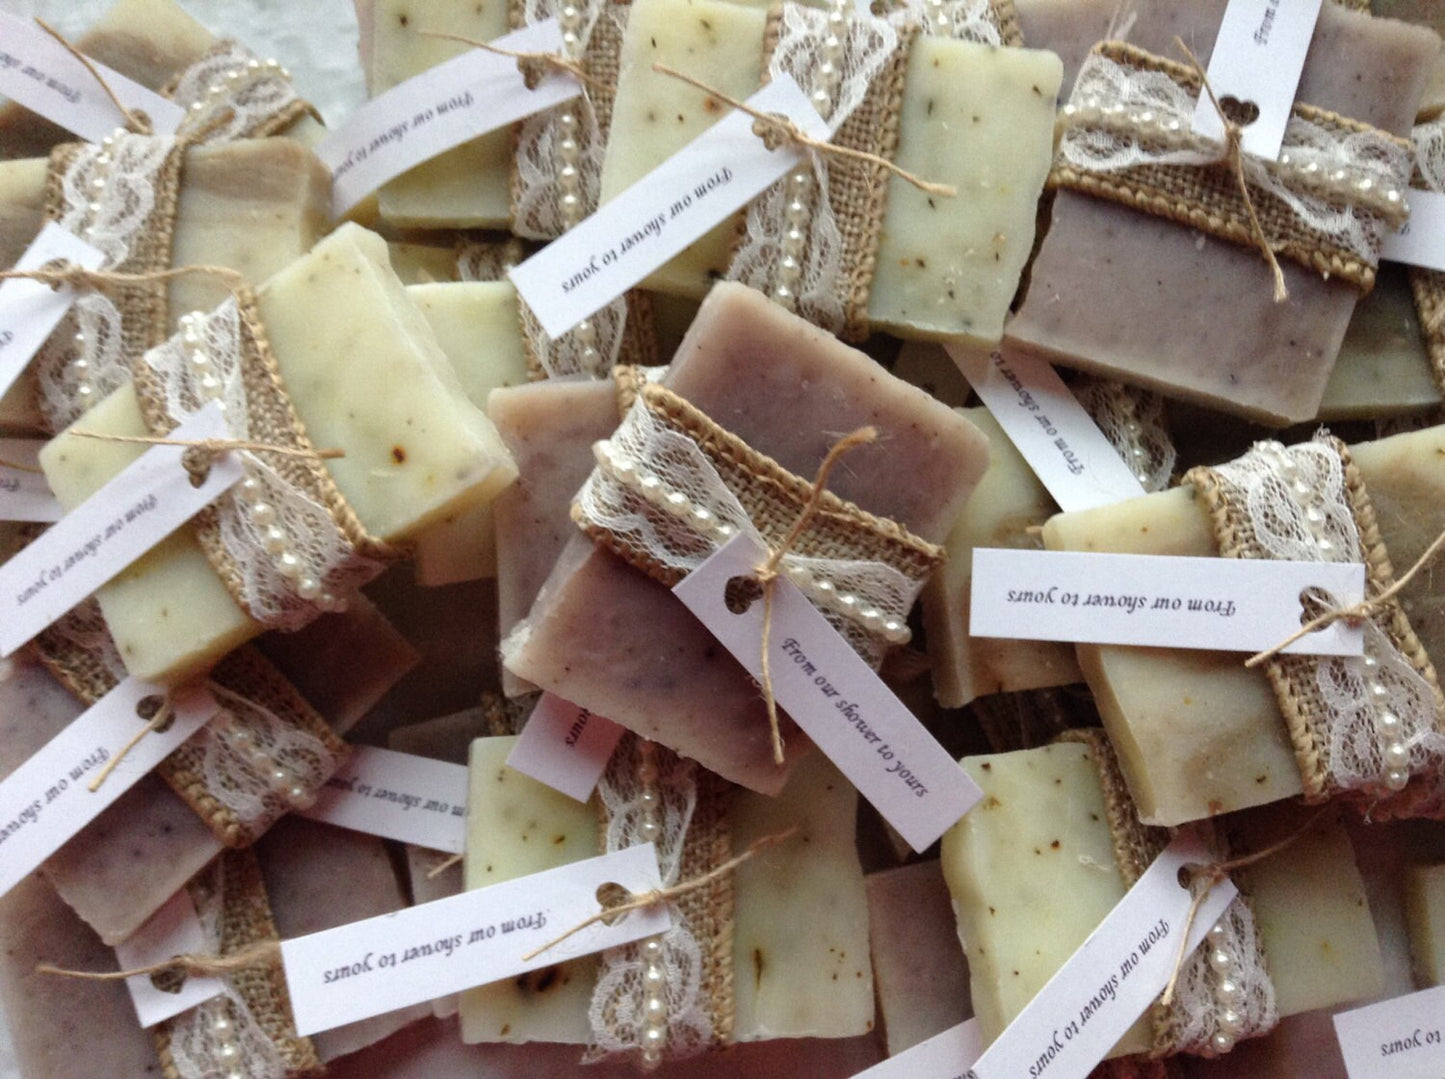 Soap Favors- Weddings- Bridal-Baby-Showers-Burlap, Lace and Pearls-Rustic-French Chic- Country- Belle Savon Vermont